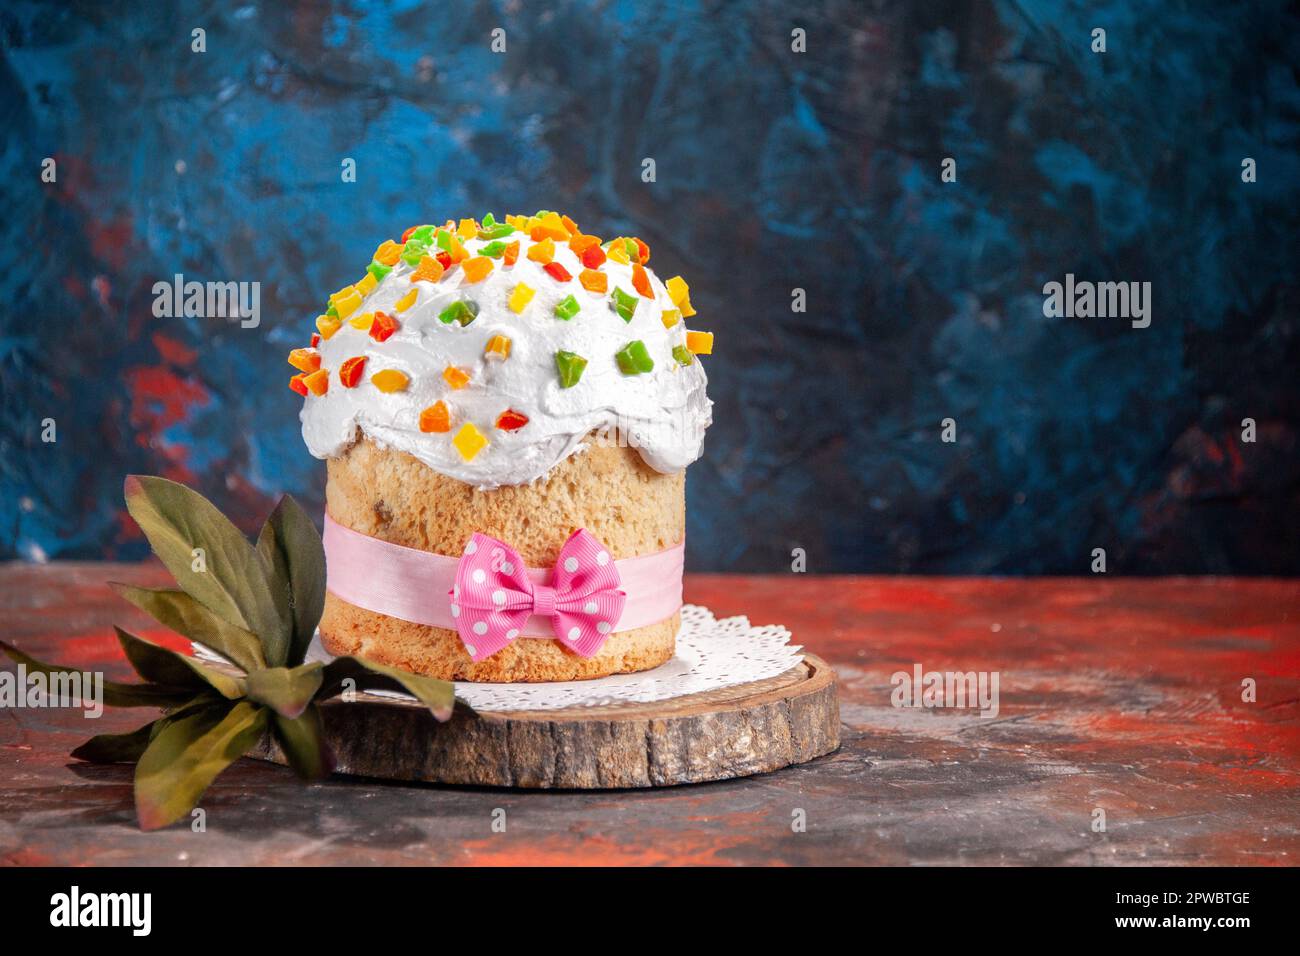 front view delicious easter cake with white cream and dried fruits on dark background spring dessert sweet pie bake ornate concept Stock Photo